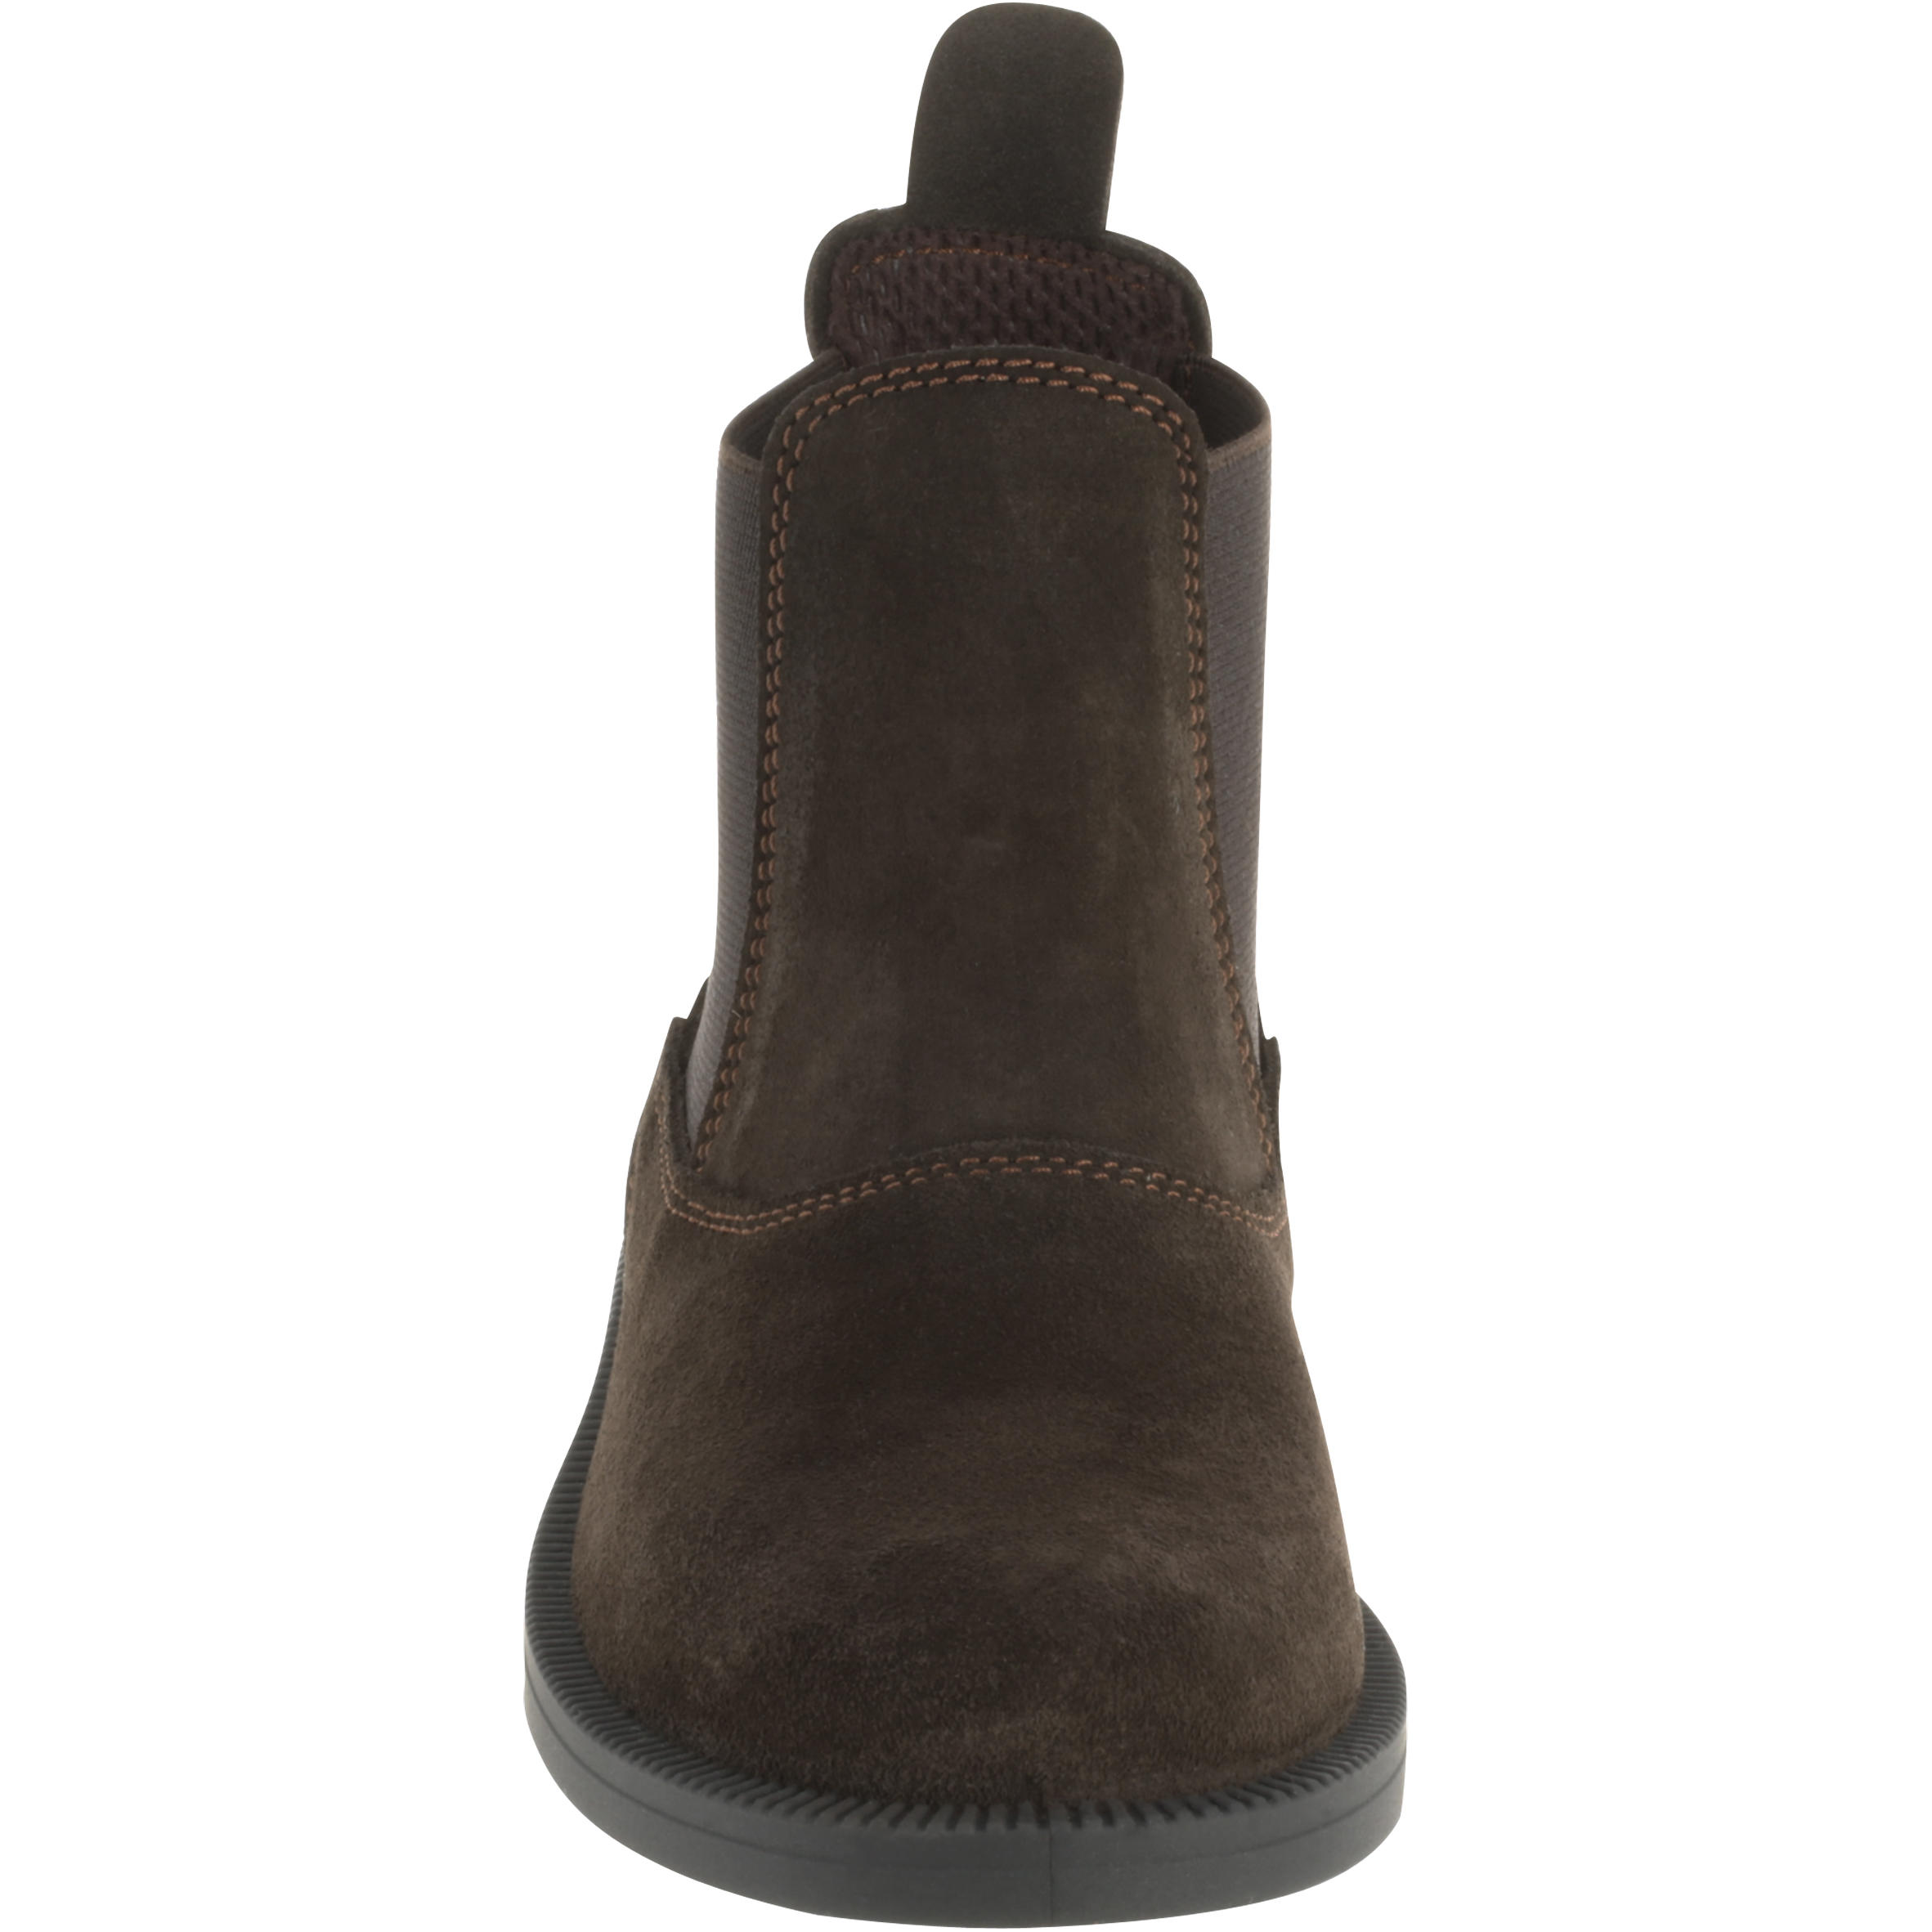 Kids' Horse Riding Leather Jodhpur Boots Classic - Brown 4/13